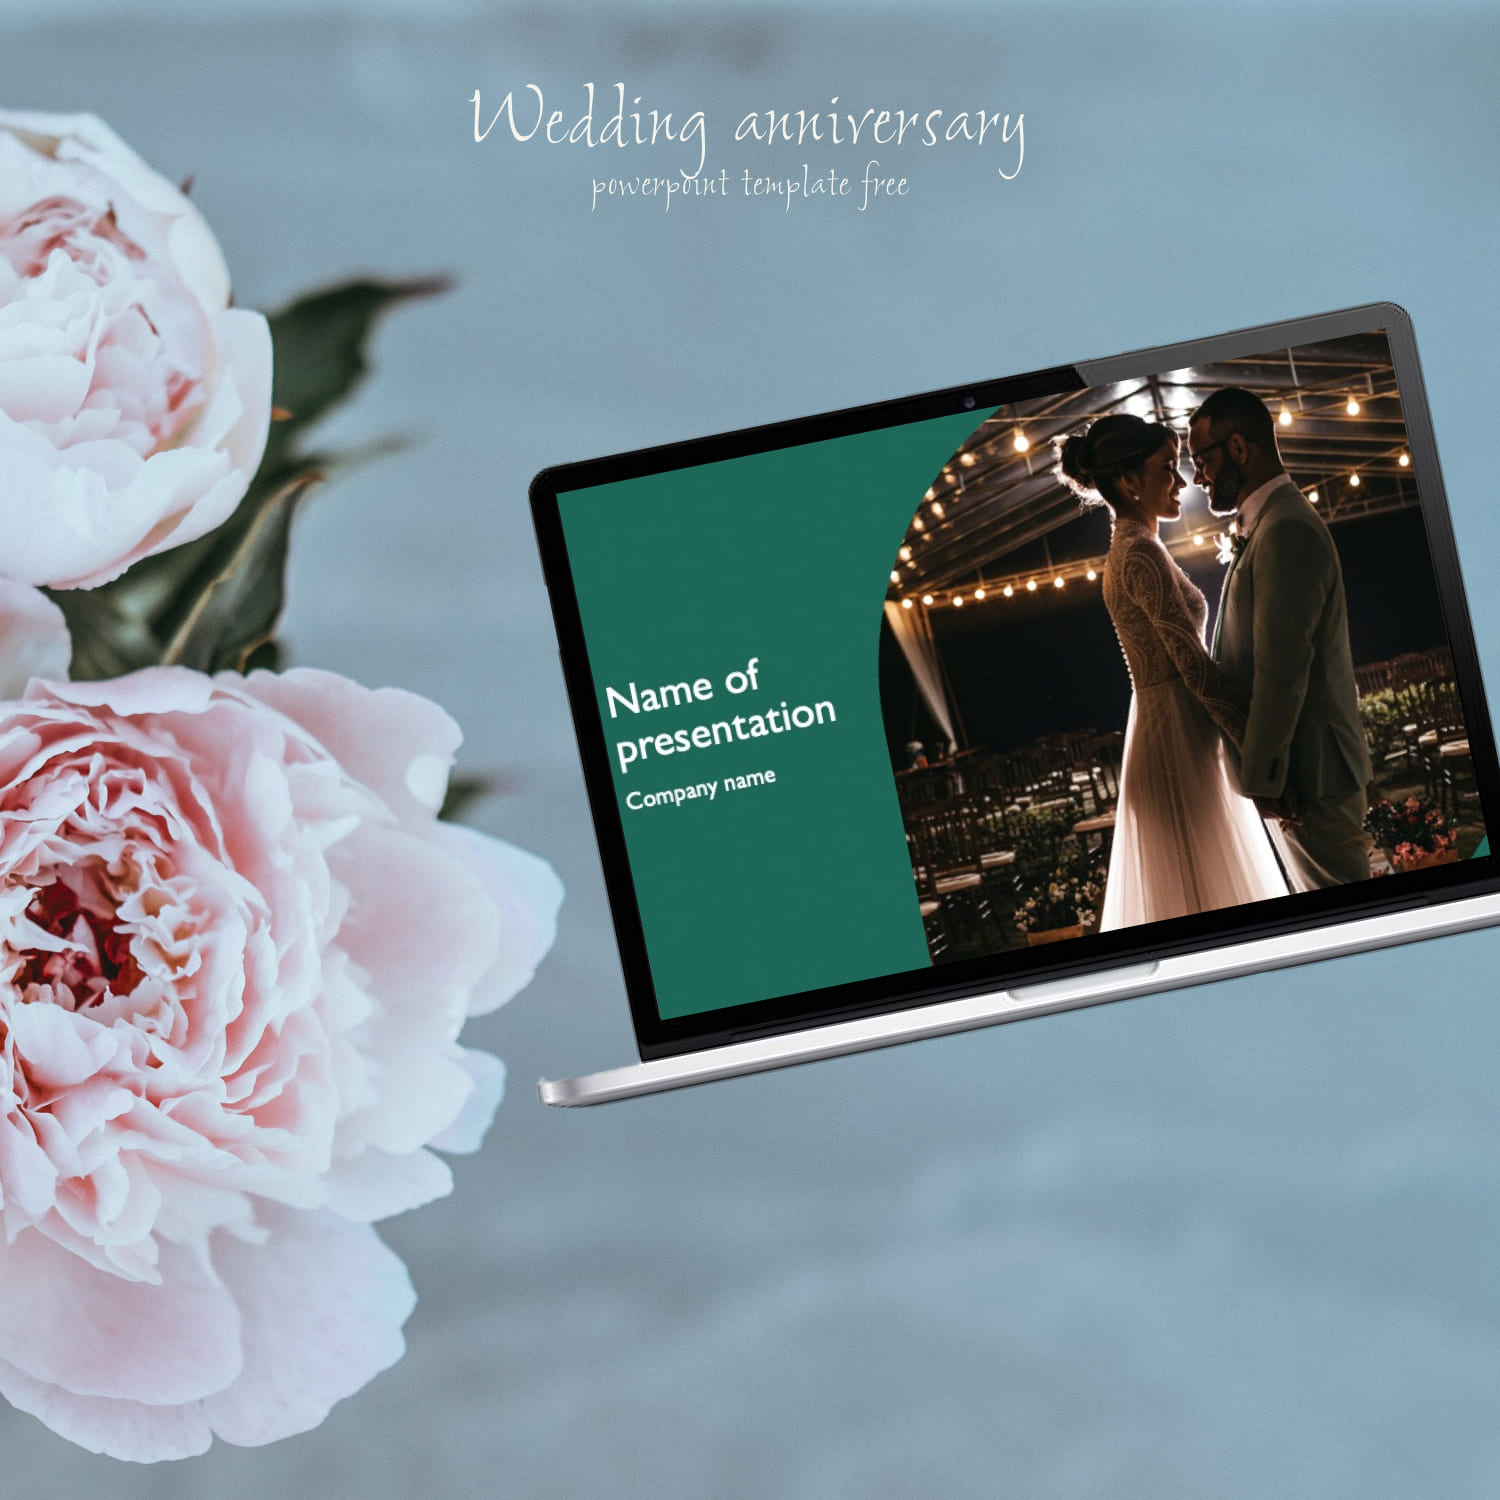 Wedding Anniversary Powerpoint Template Free Preview 1500 1.